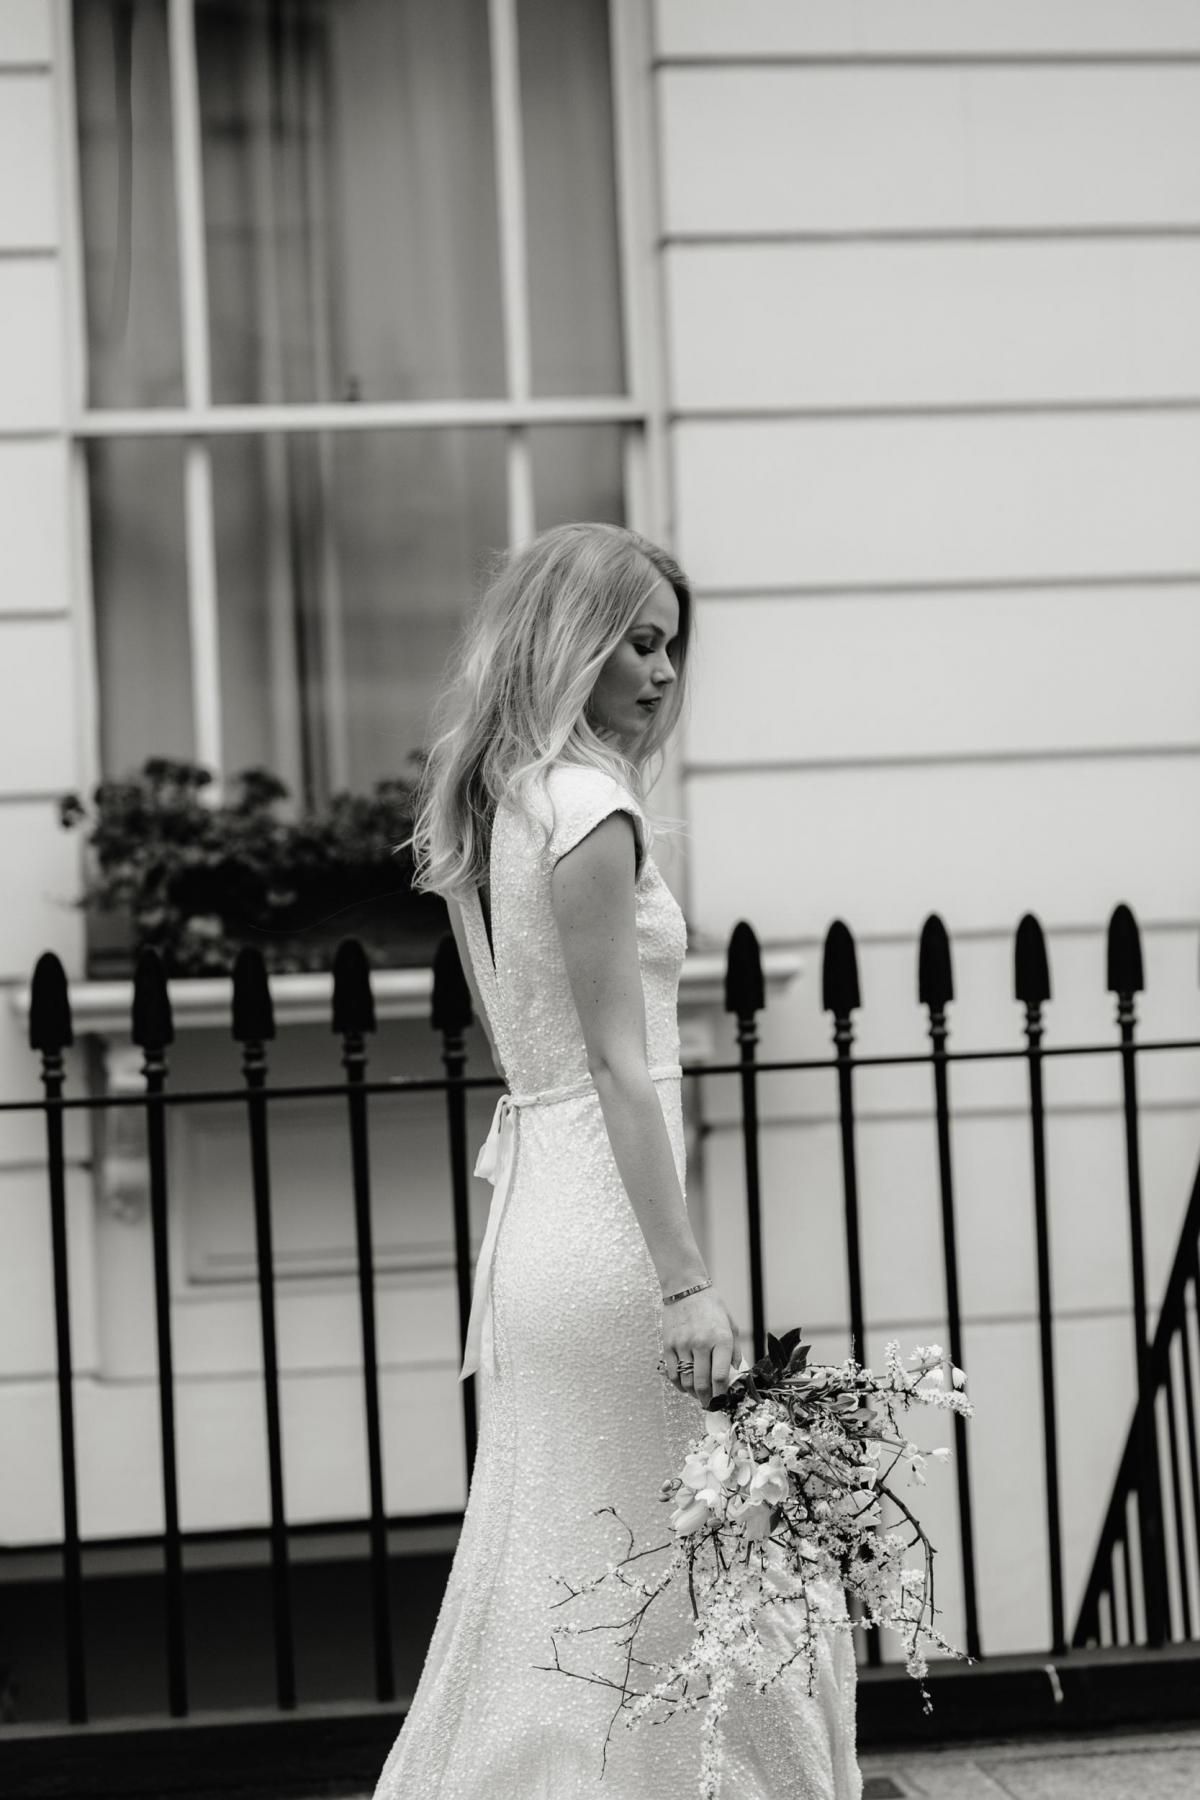 The Annette gown by Karen Willis Holmes, shimmer fit and flare wedding dress.